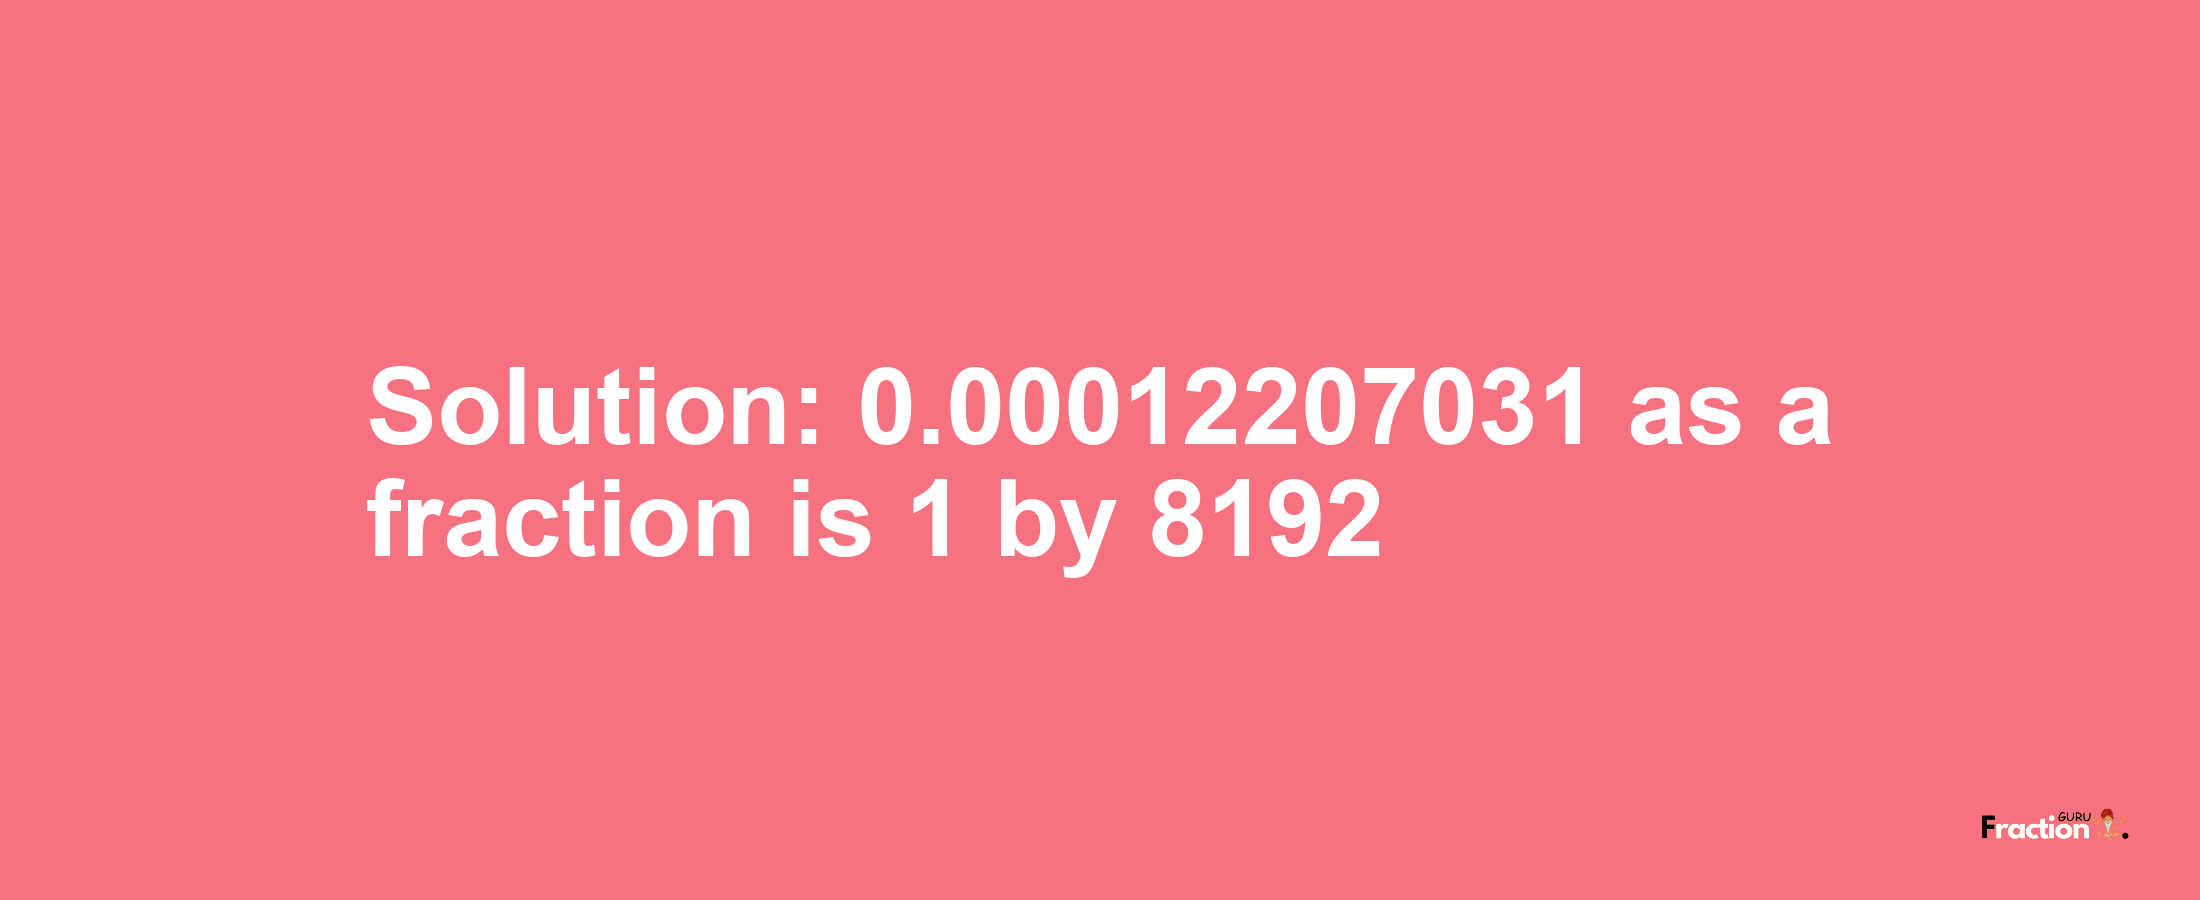 Solution:0.00012207031 as a fraction is 1/8192